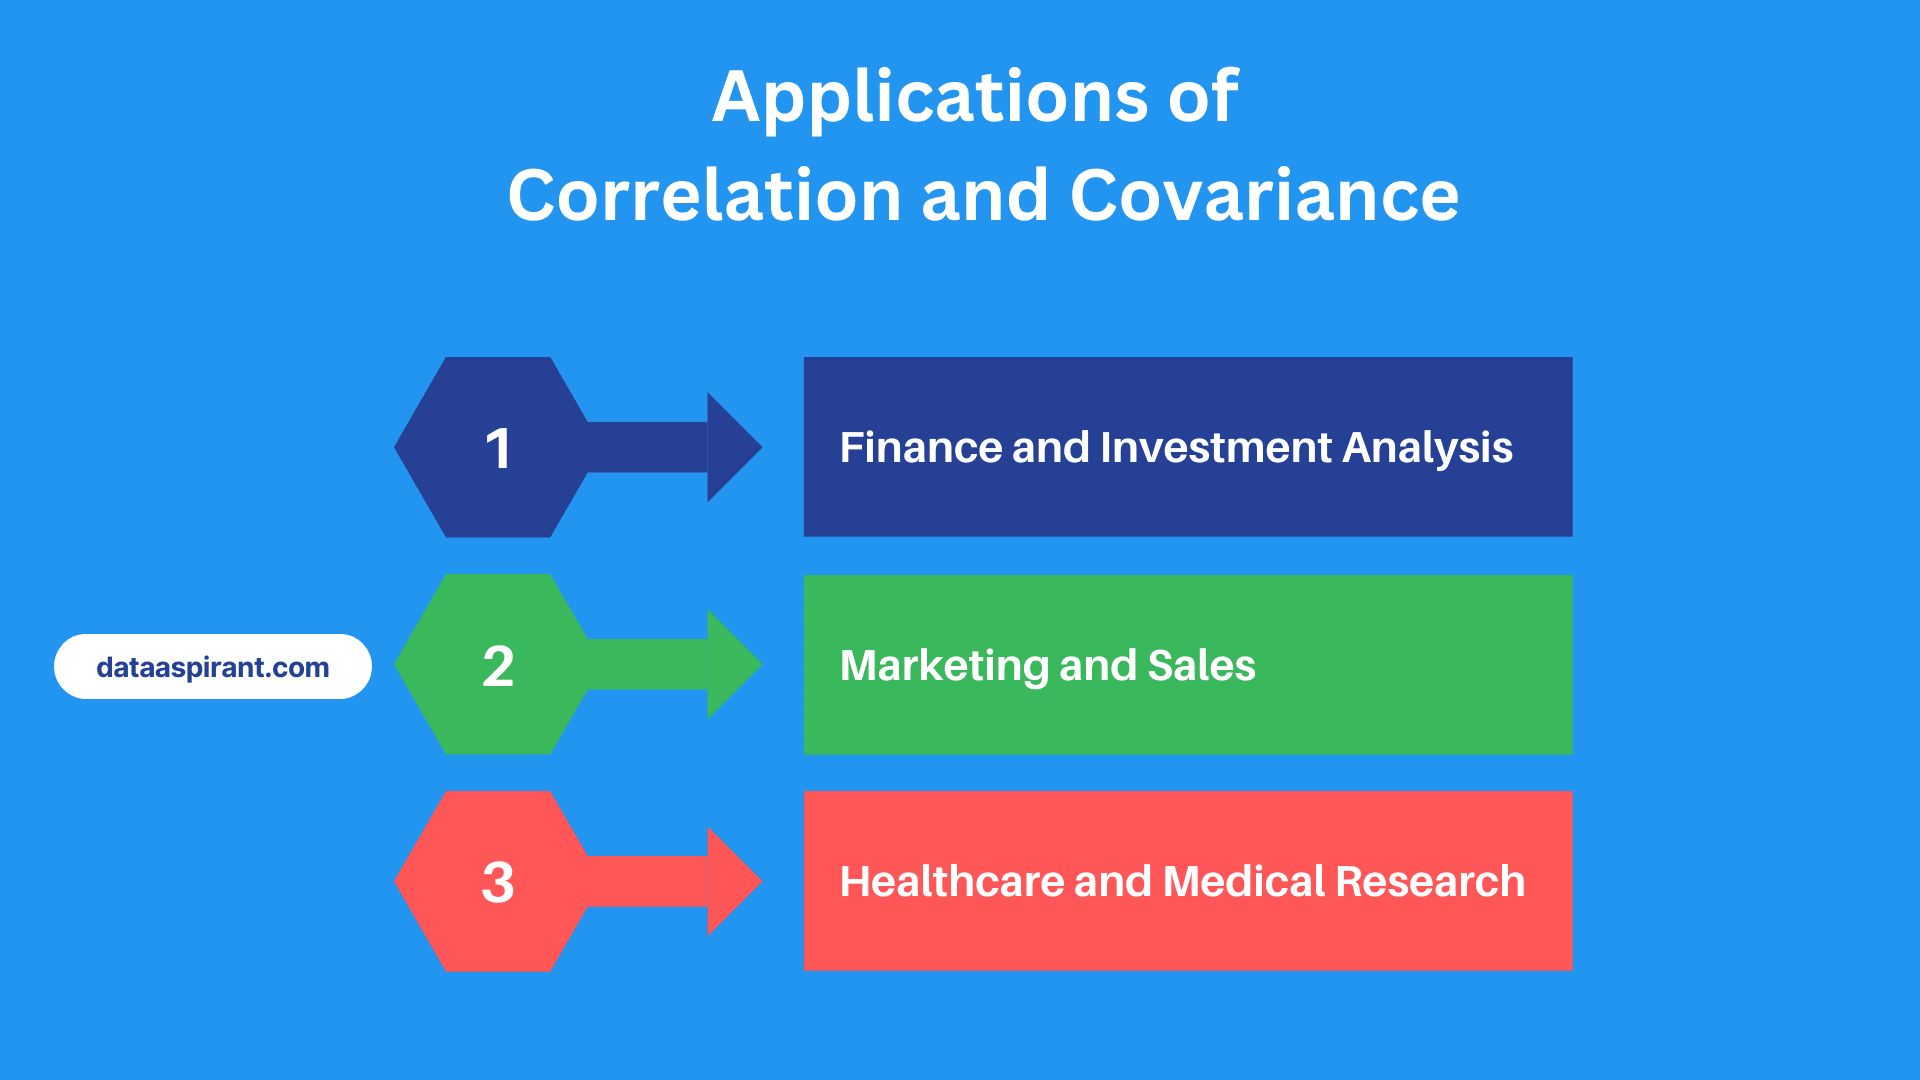 Applications of Correlation and Covariance